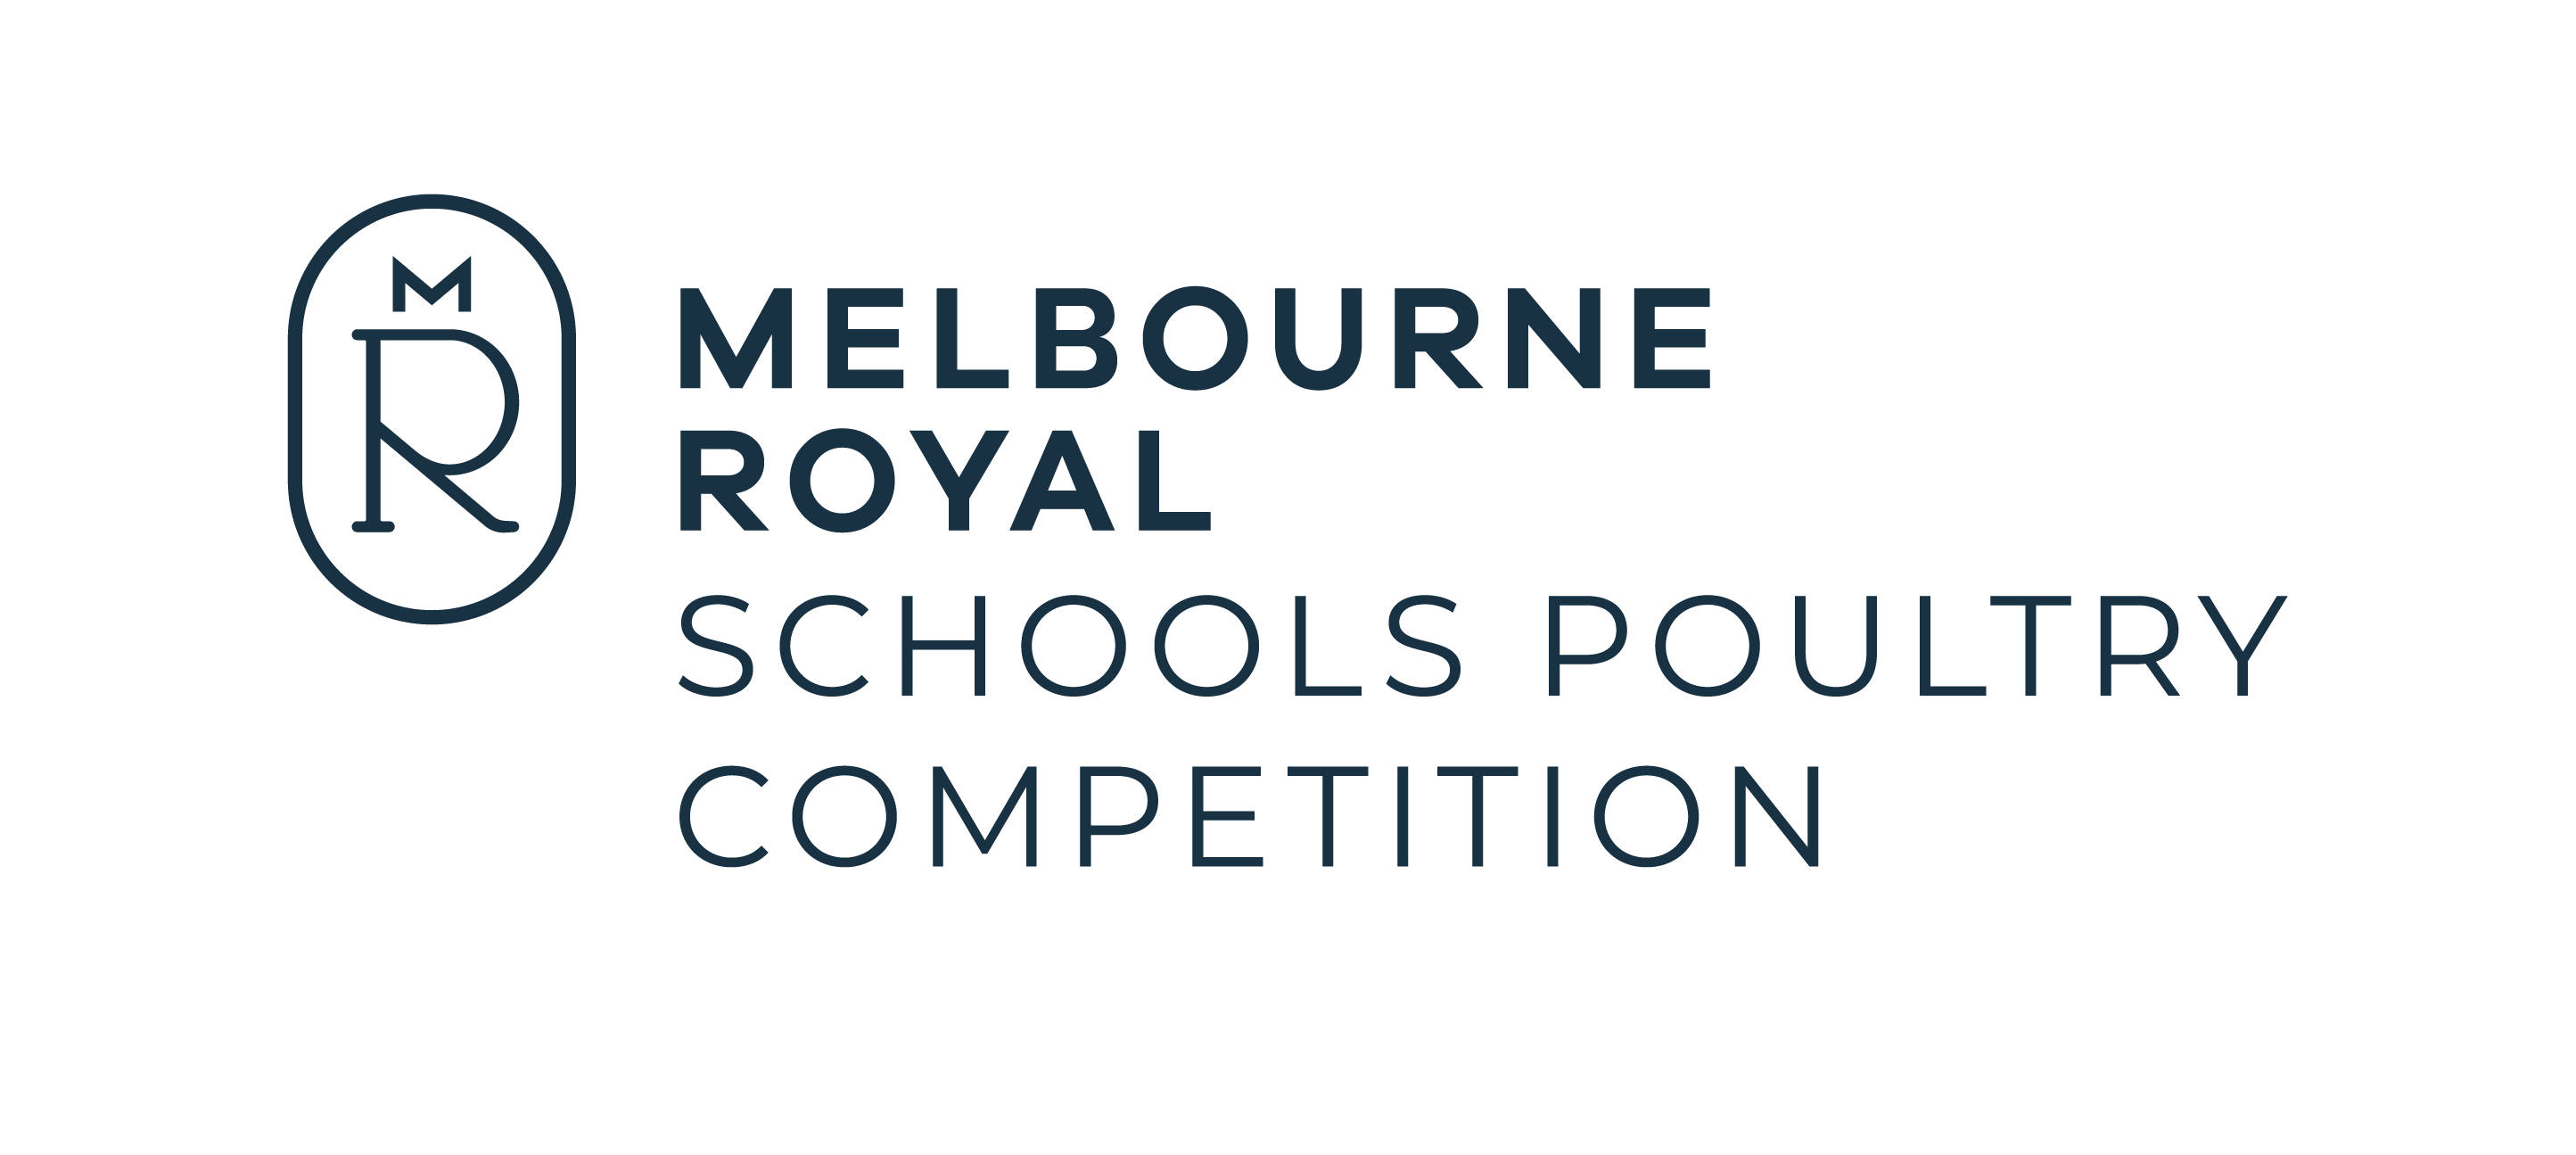 Melbourne Royal Schools Poultry Competition | Home